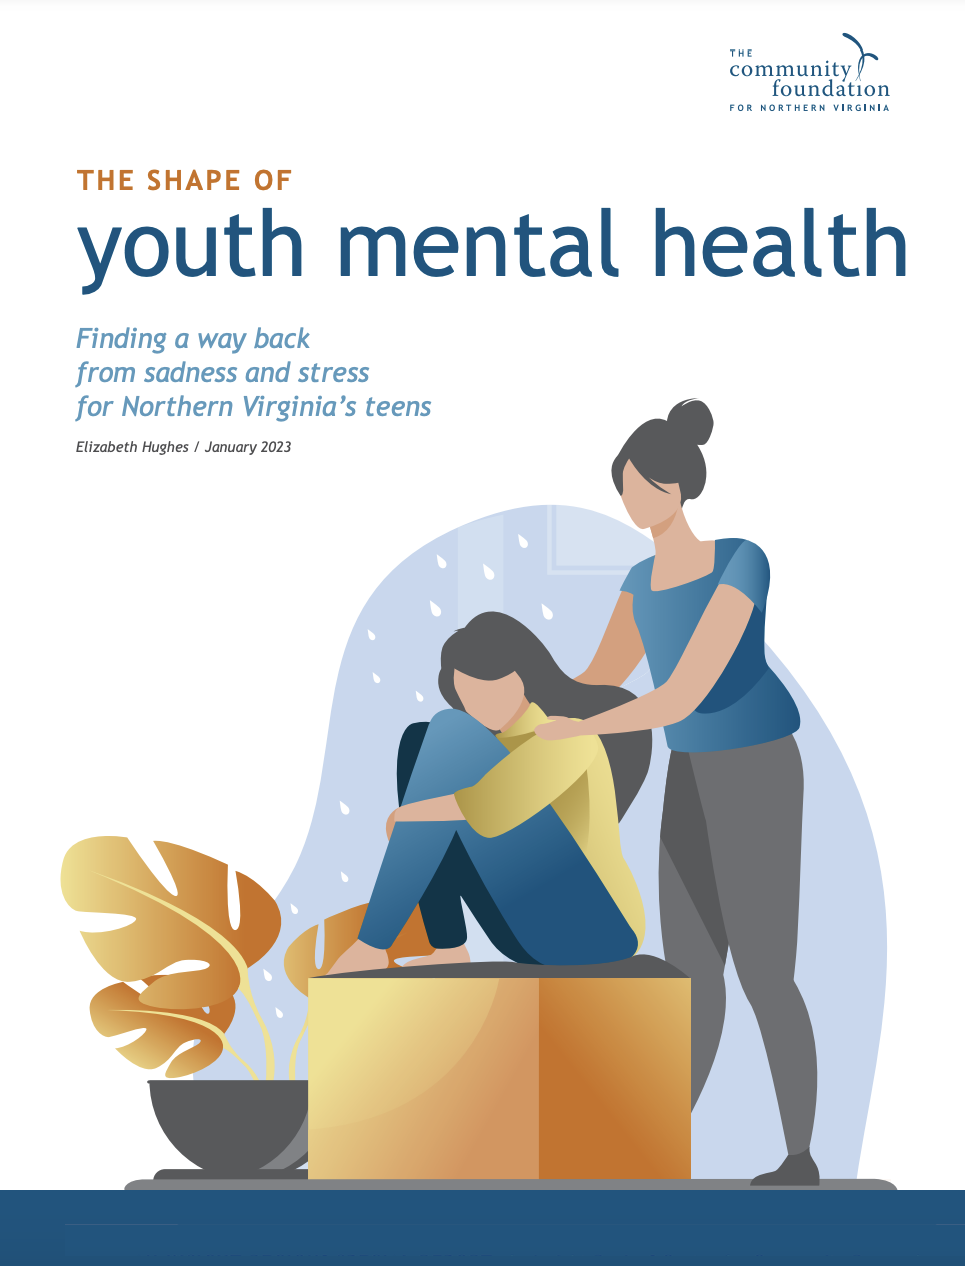 Cover of report titled - The shape of youth mental health - finding a way back from sadness and stress for Northern Virginia's teens - published by The Community Foundation of Northern Virginia